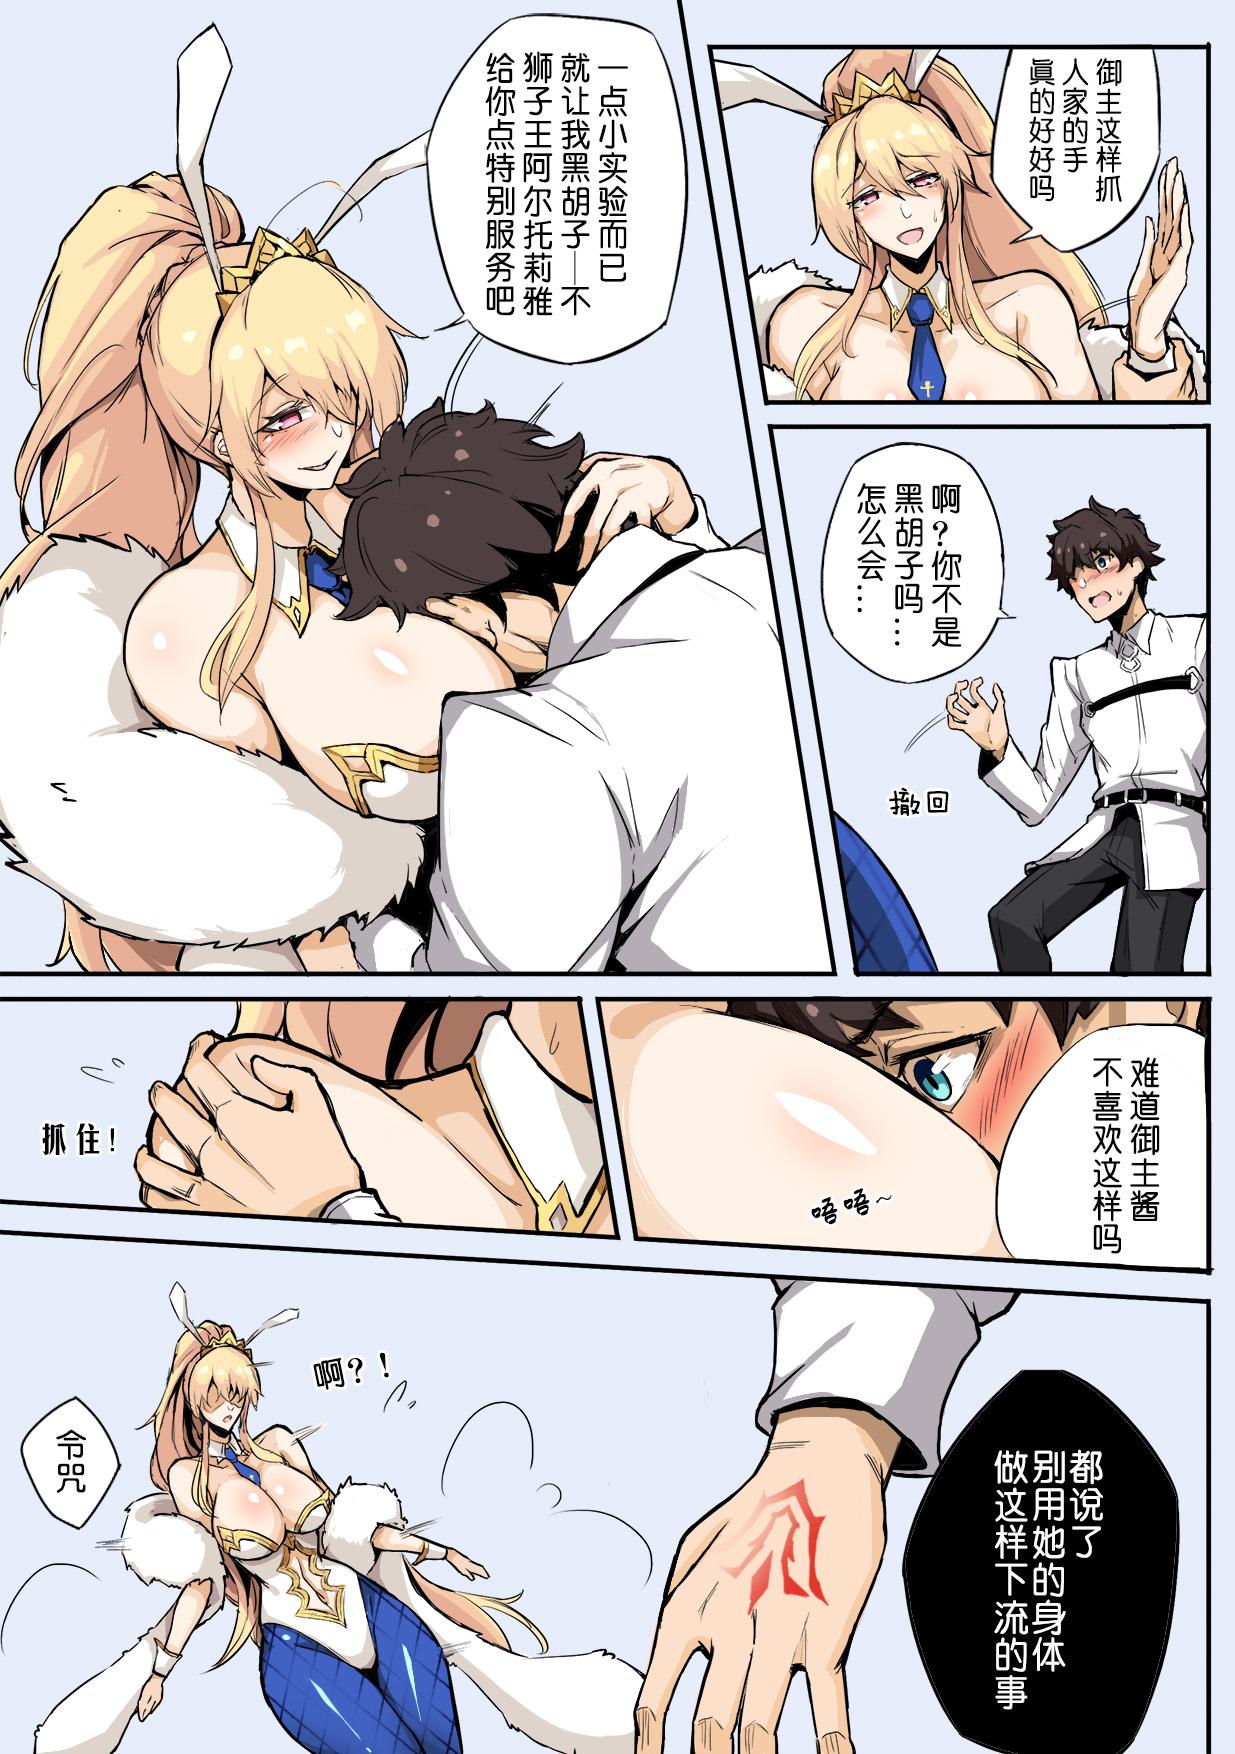 Ass Licking fate 黑胡子的阴谋 - Fate grand order Teen Sex - Page 5